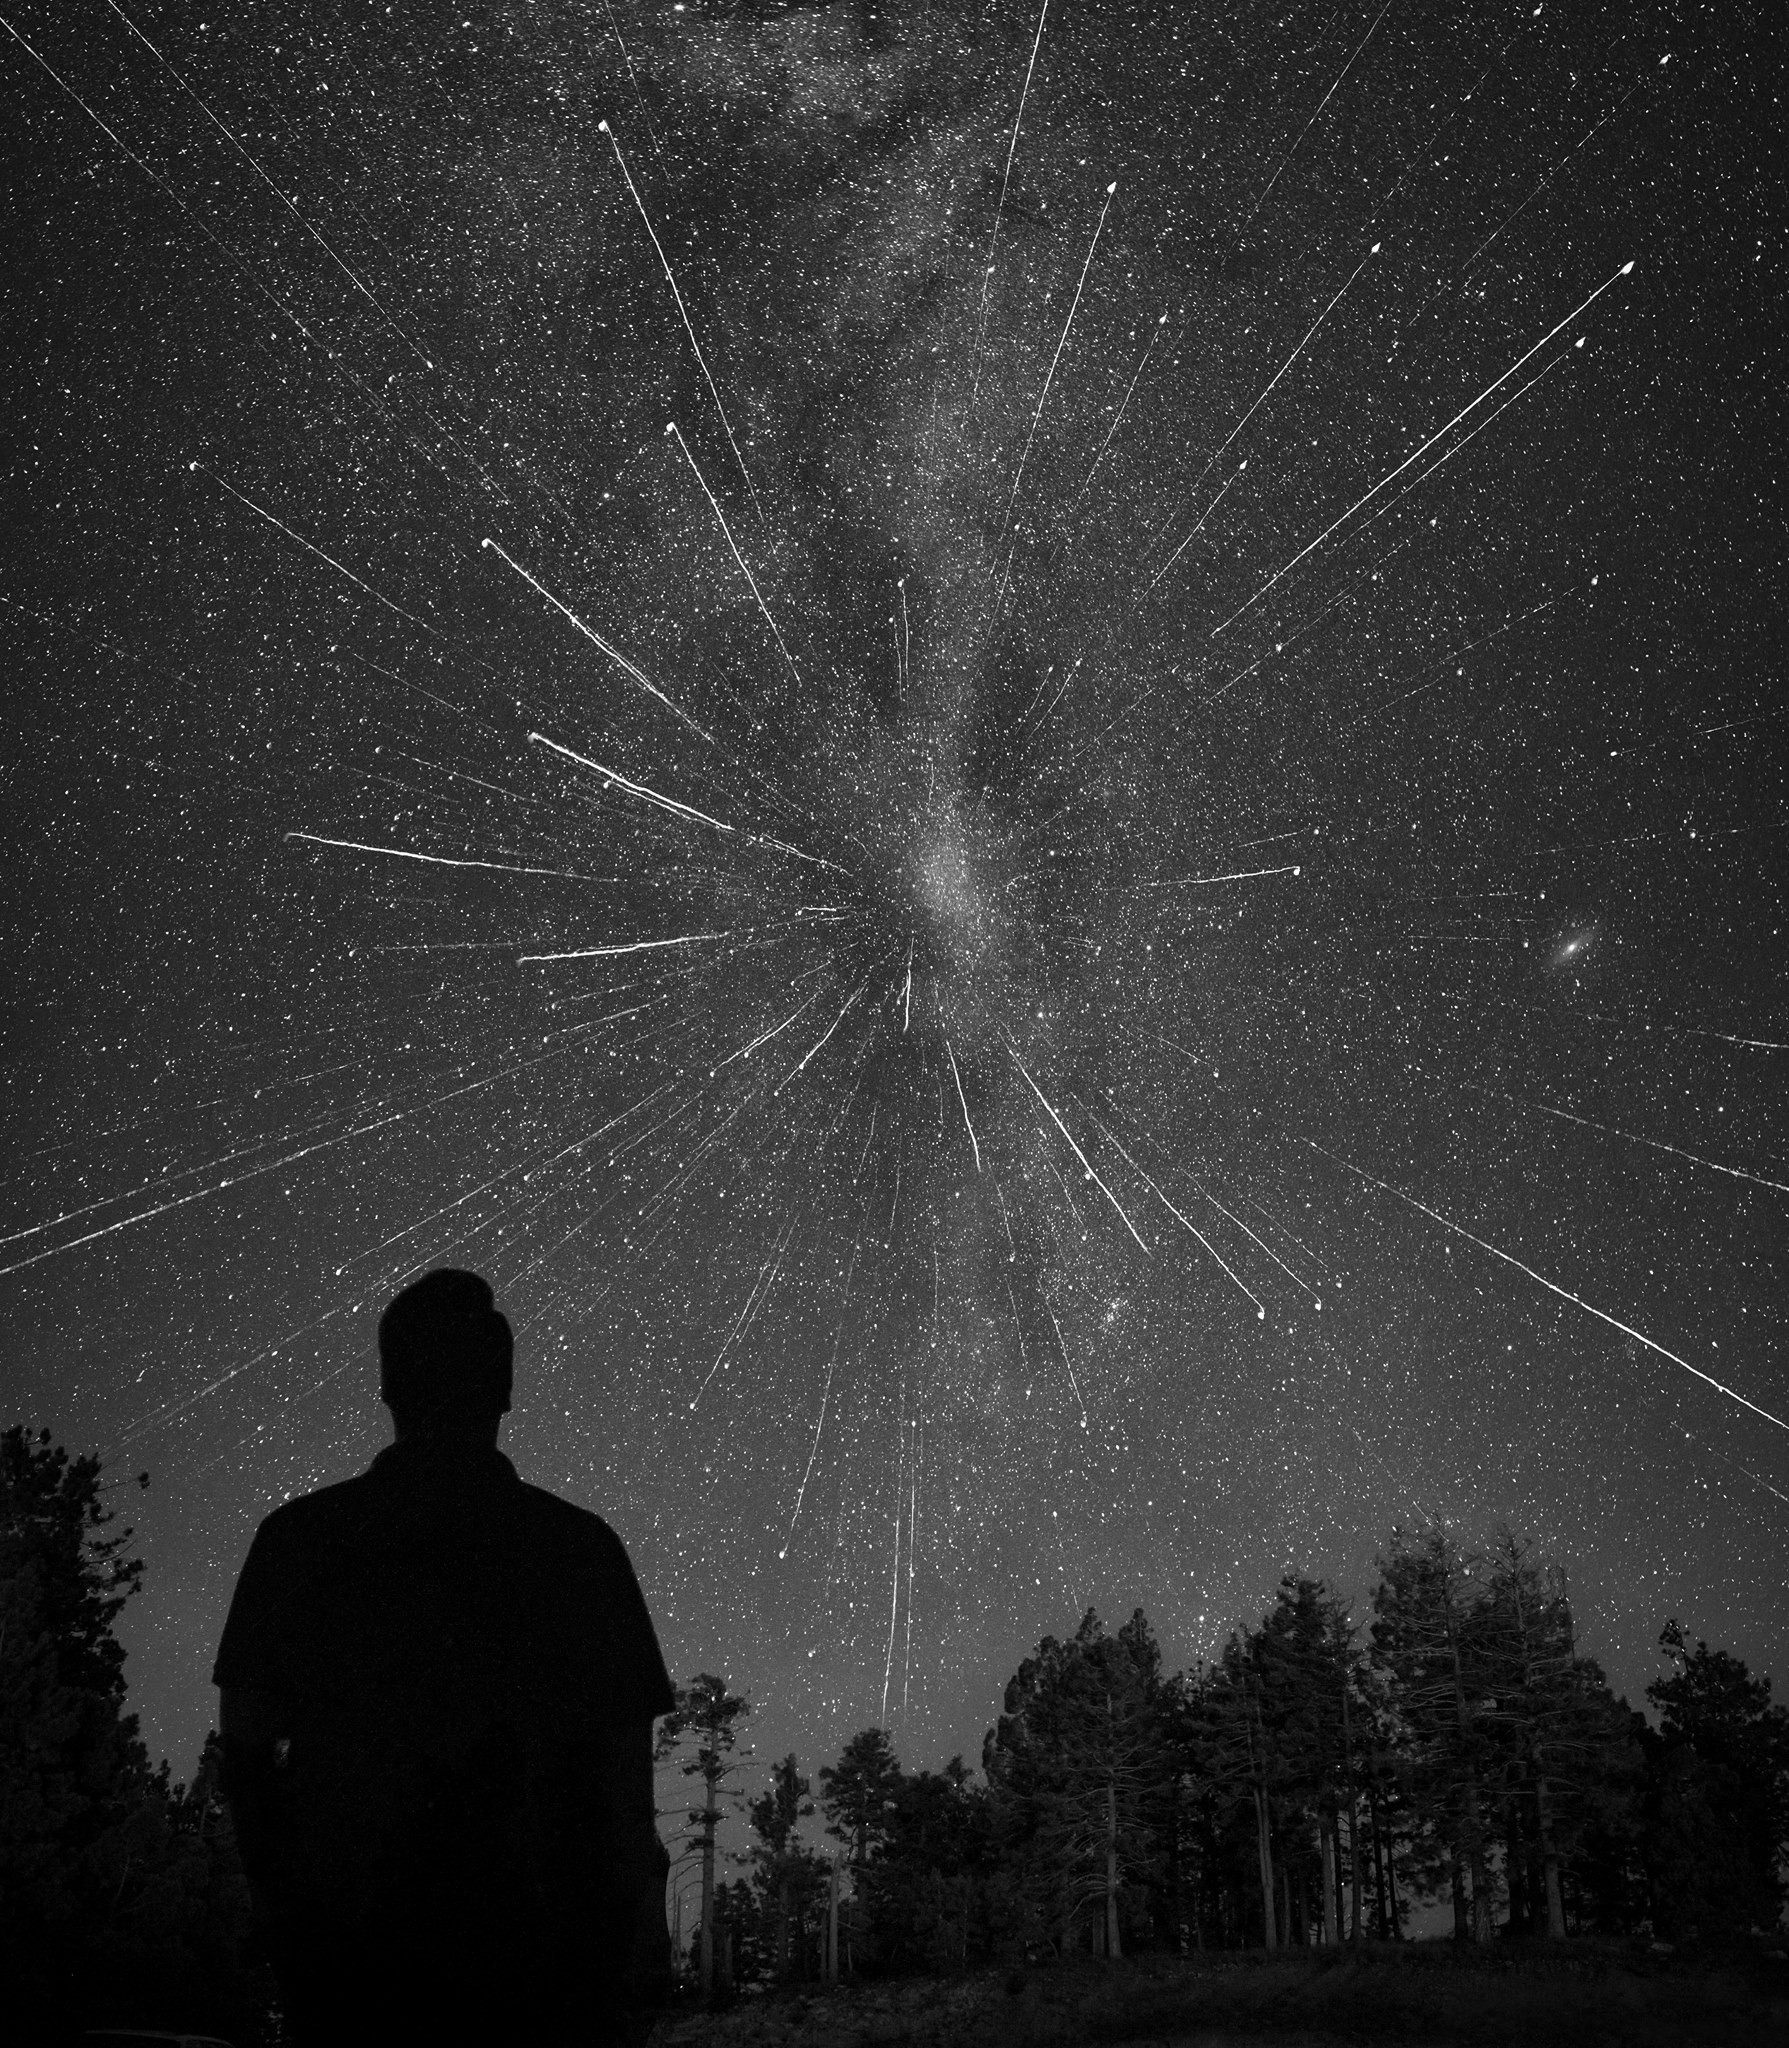 General 1789x2048 nature stars space black silhouette night looking up monochrome sky outdoors men men outdoors